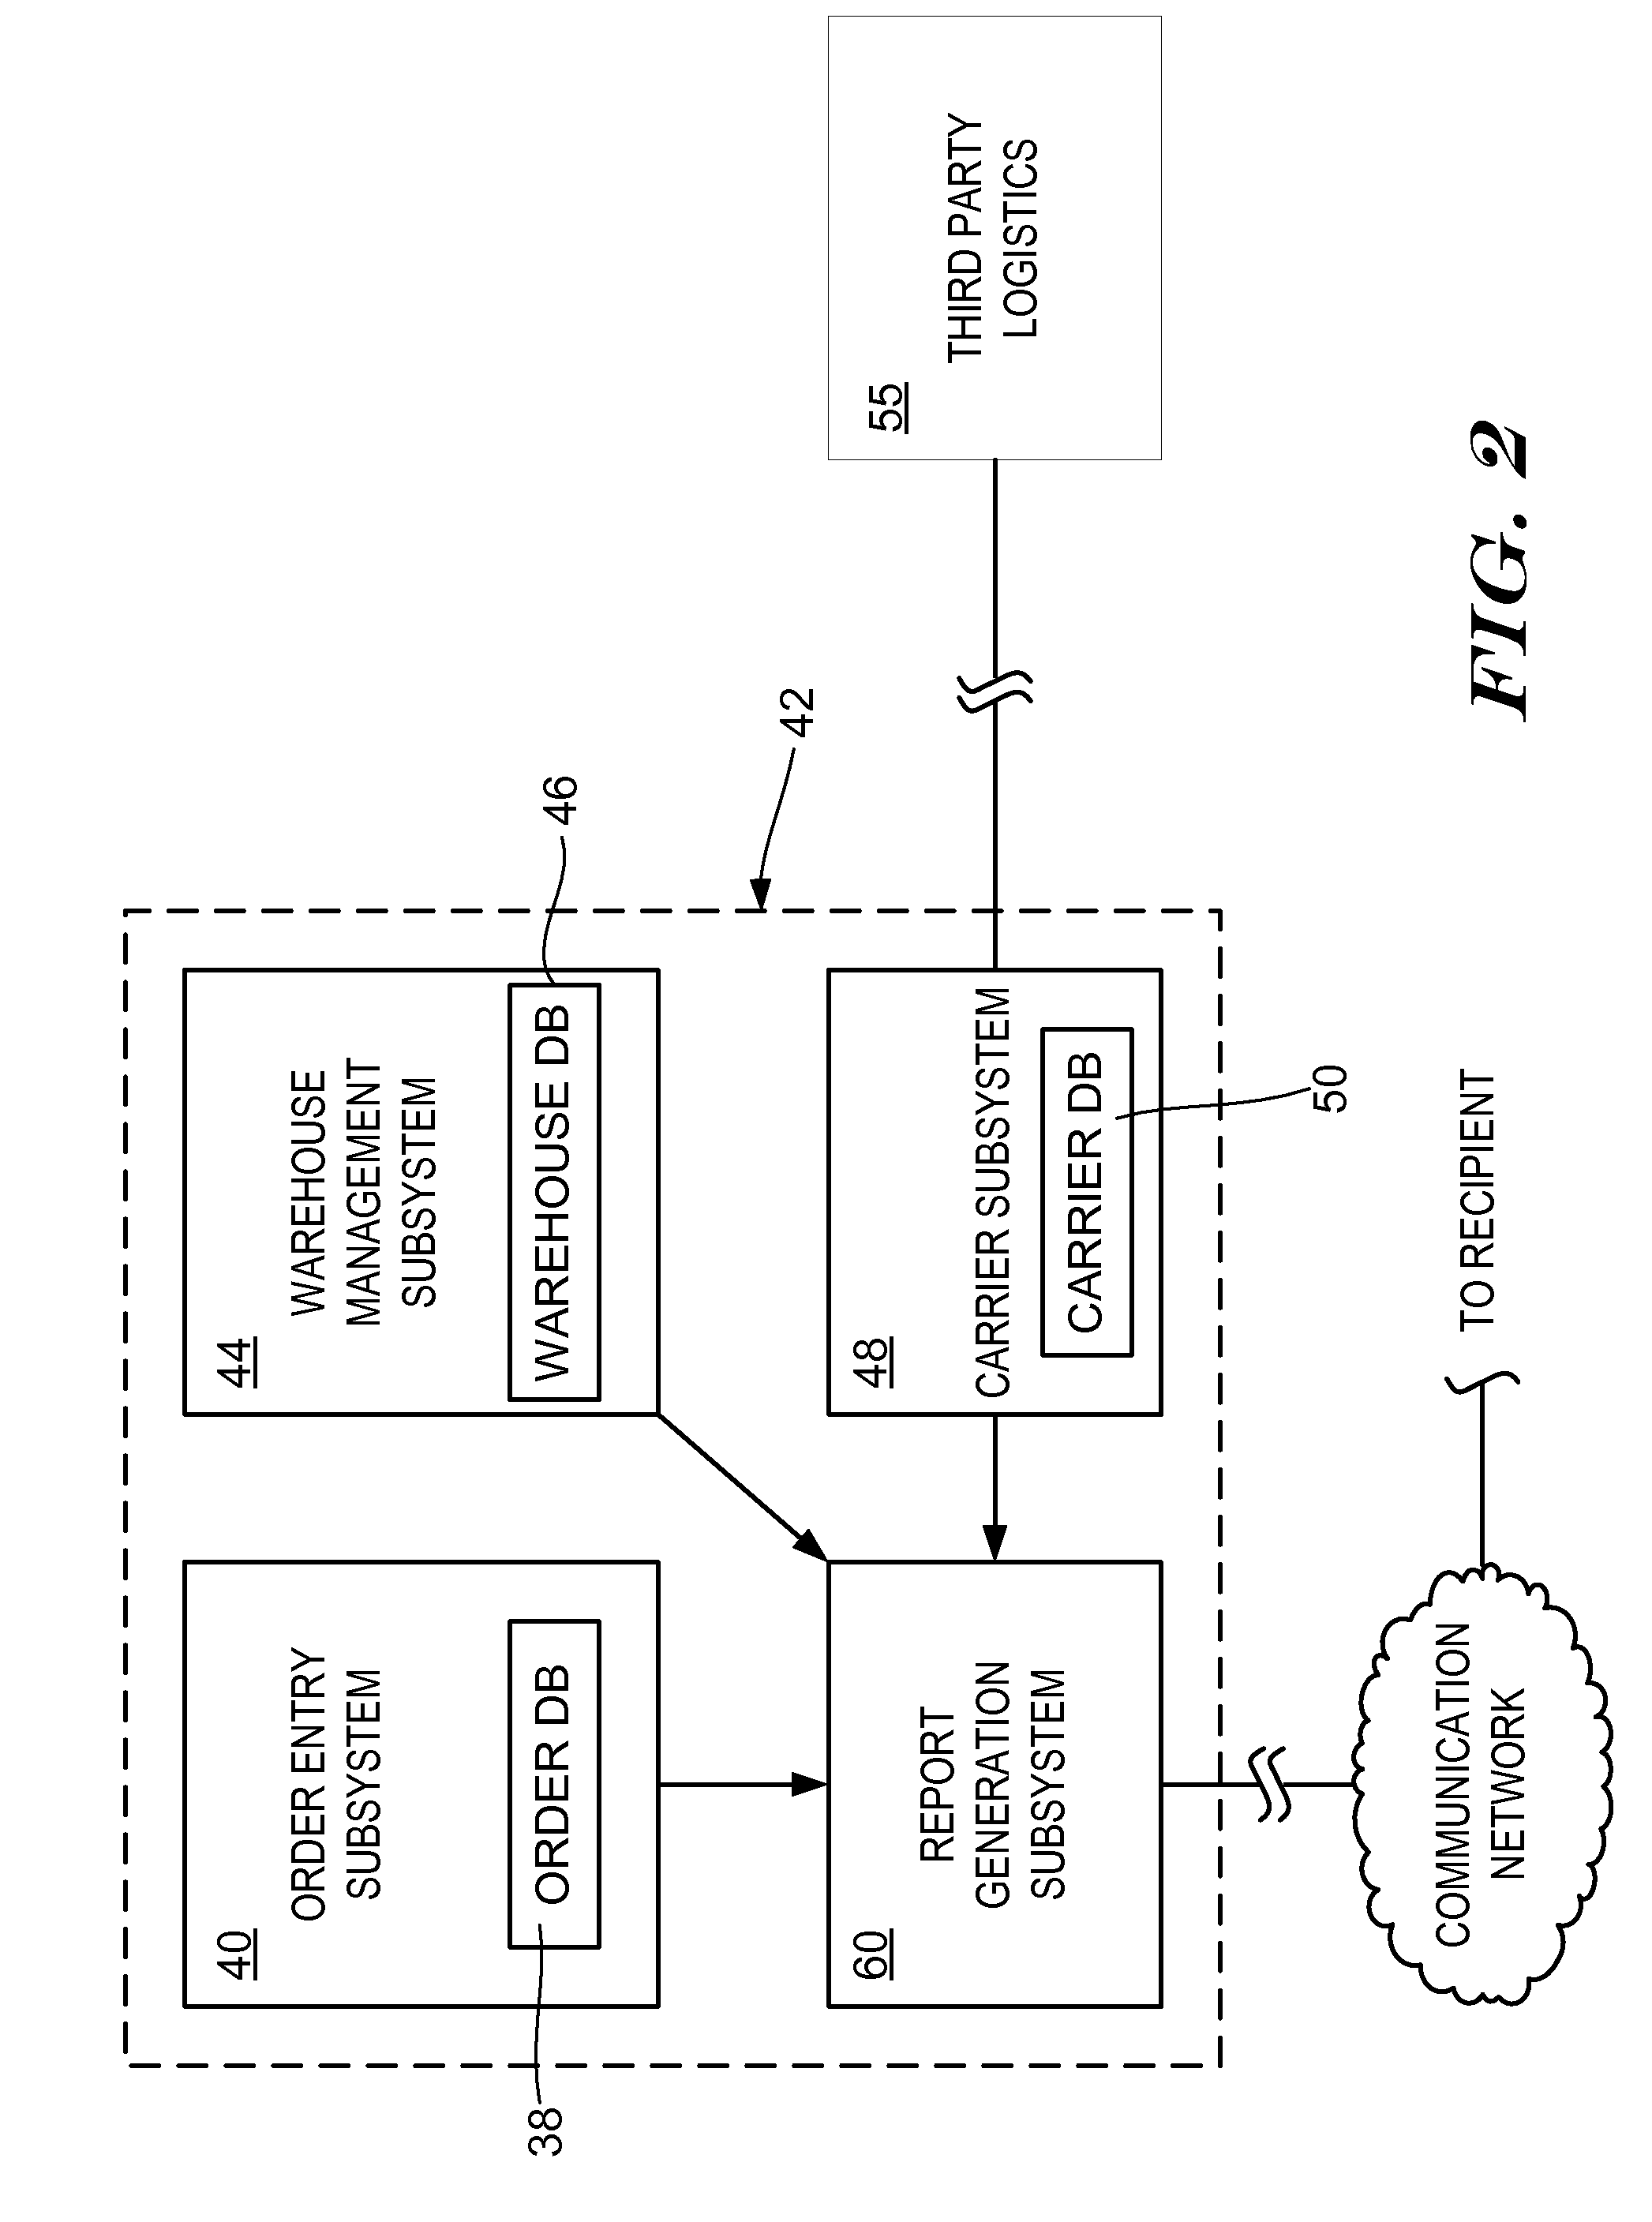 Method and apparatus for monitoring an order status